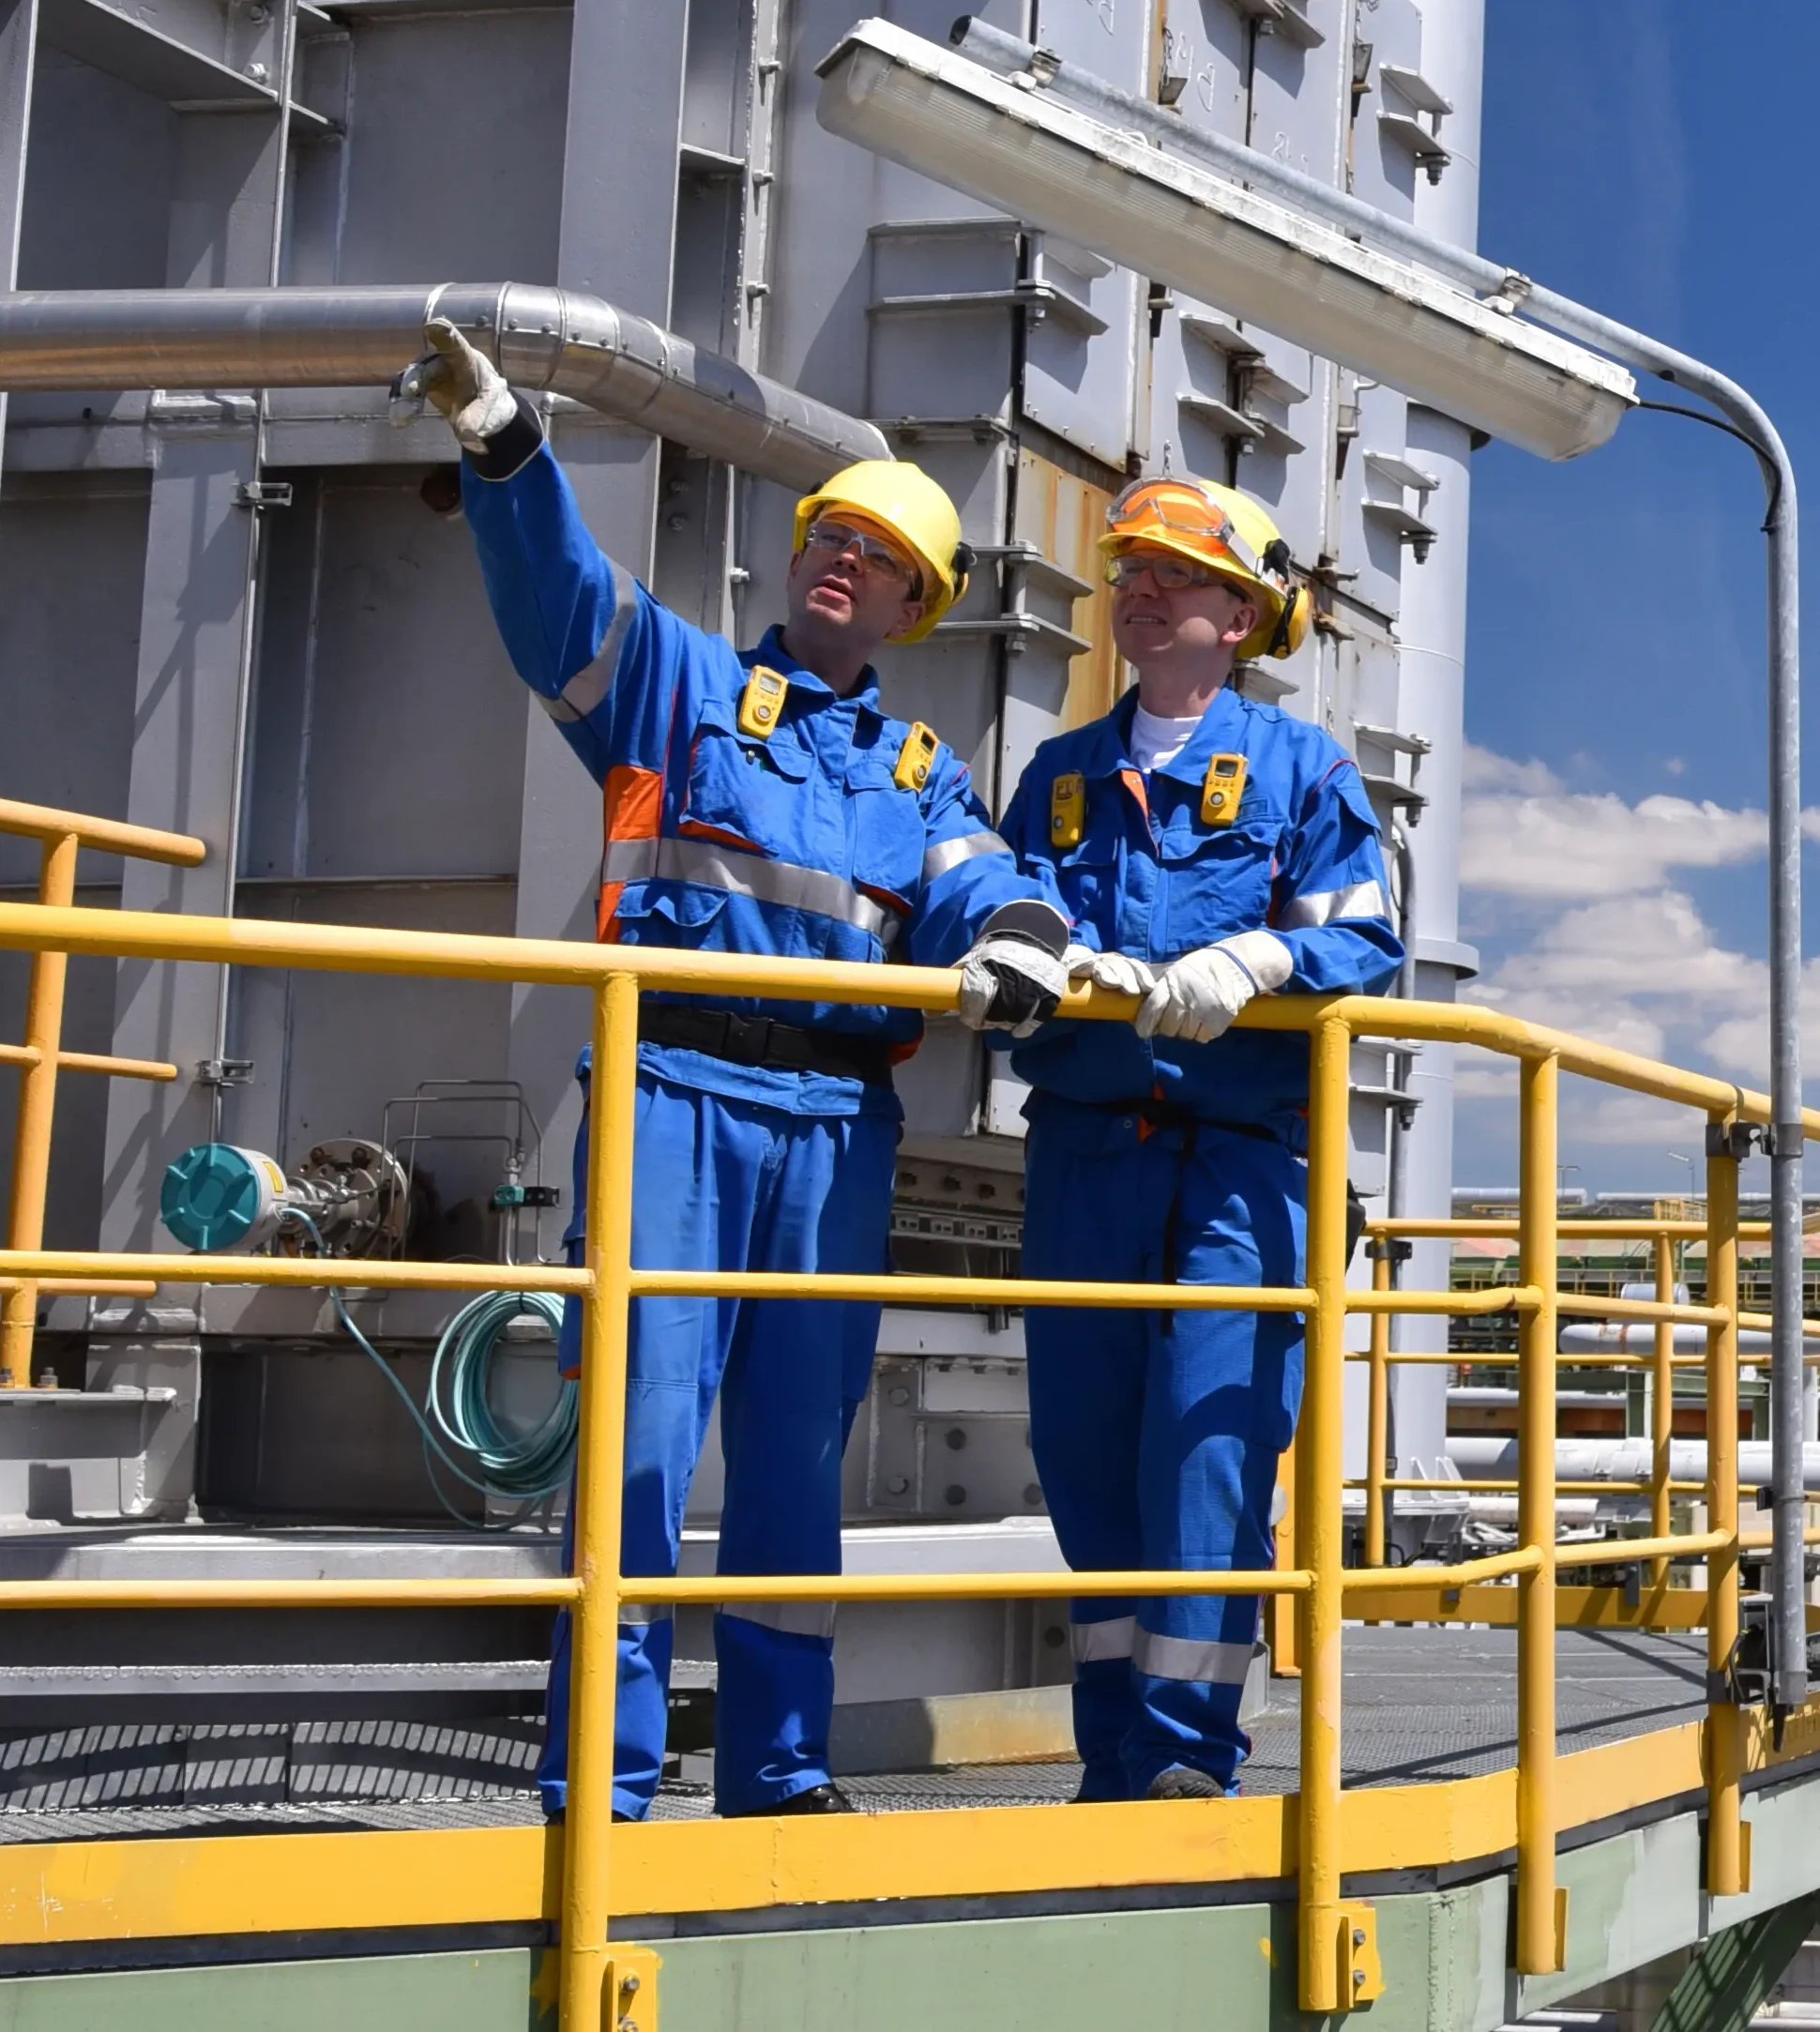 Workers in hard hats oversee industrial processes on a sunny refinery platform, ensuring safe and efficient operations